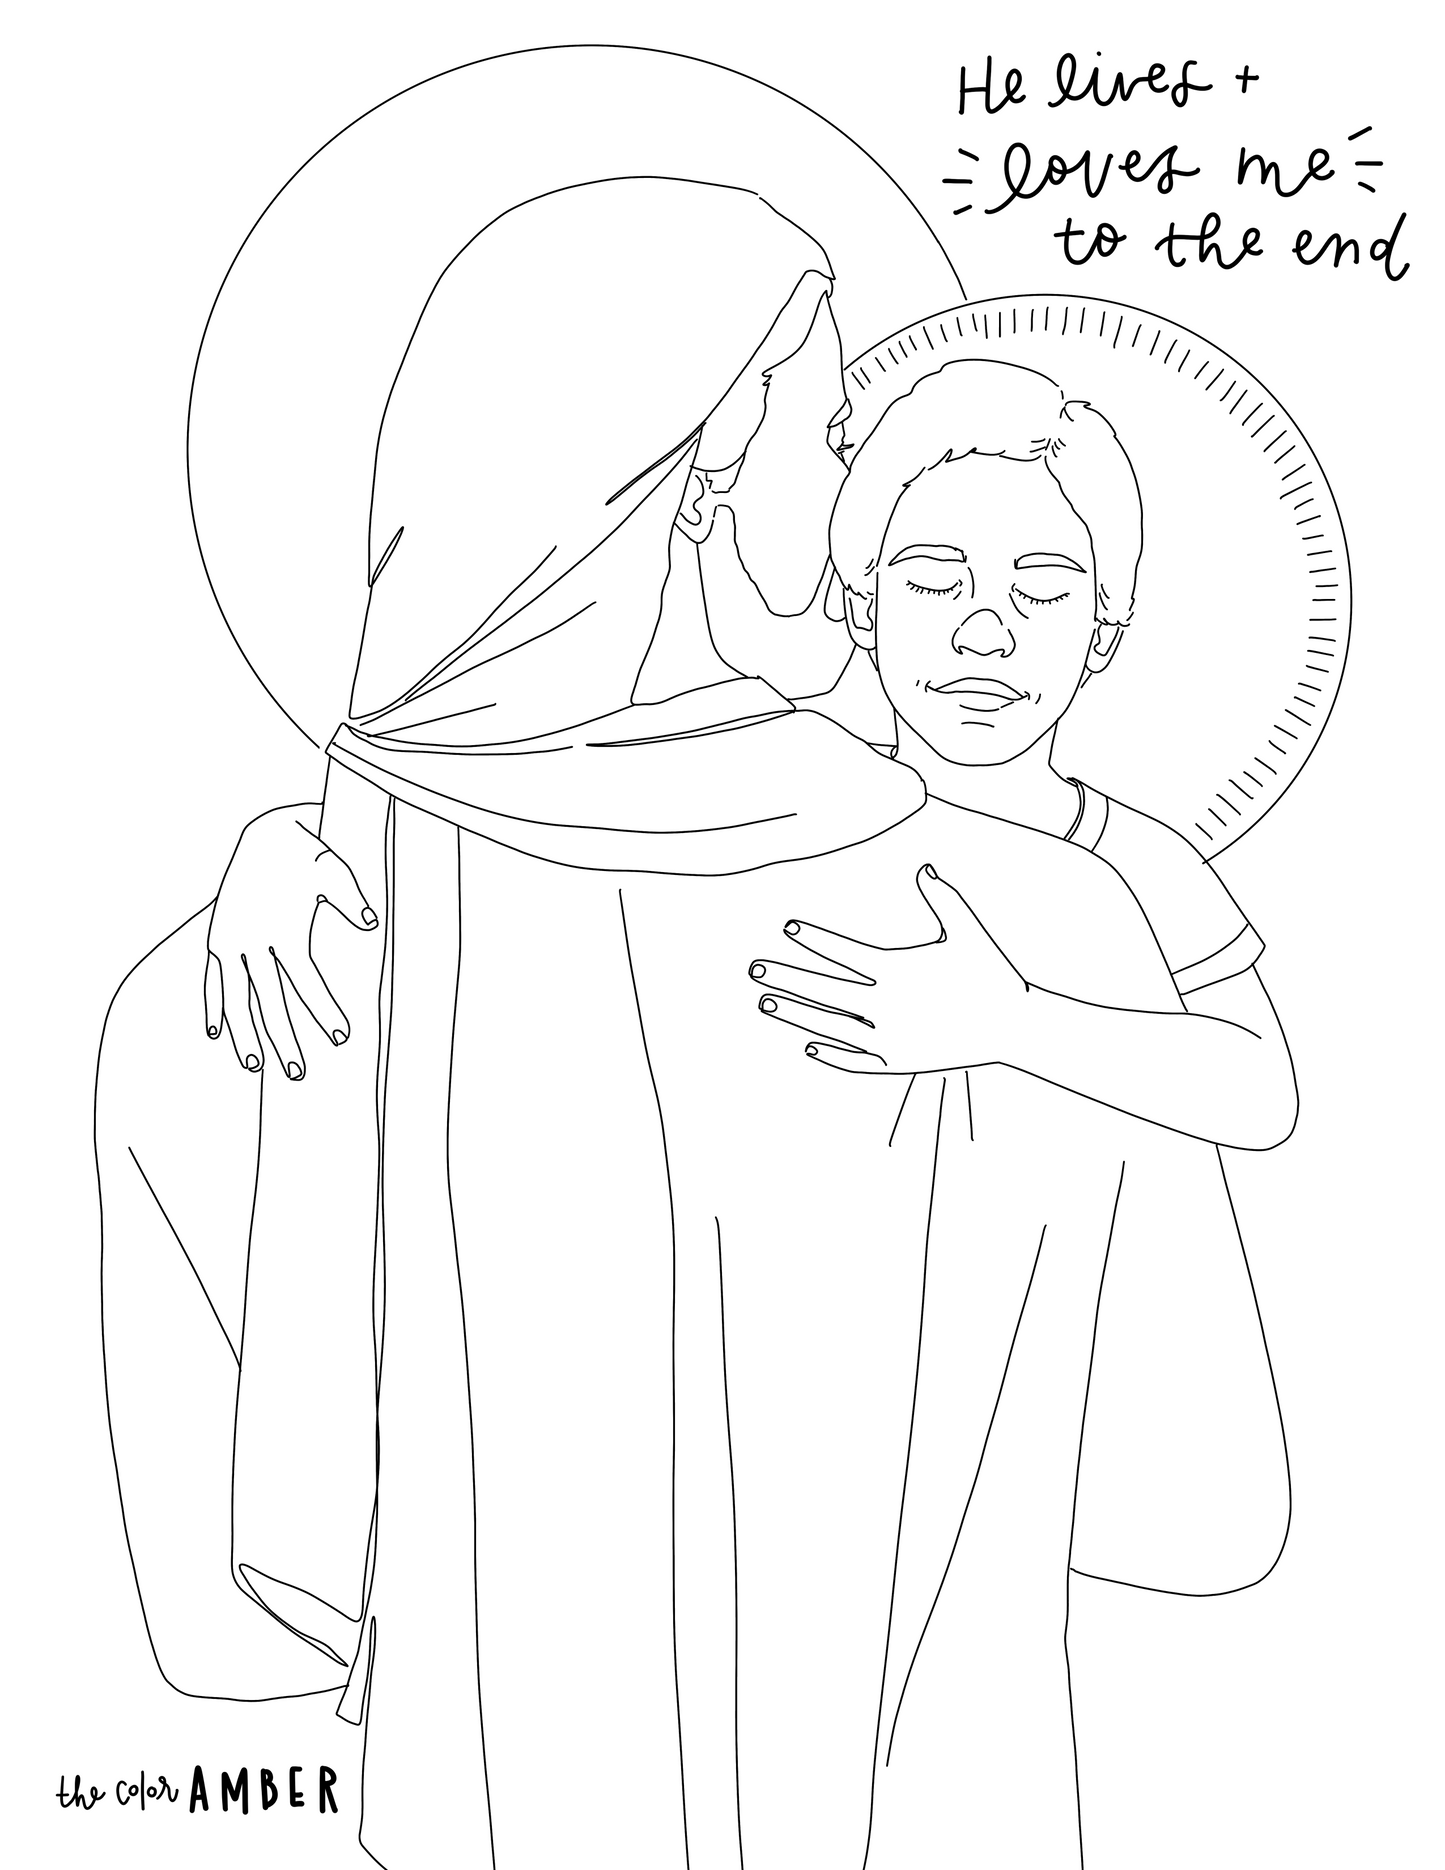 Easter 2023 - Free Coloring Pages